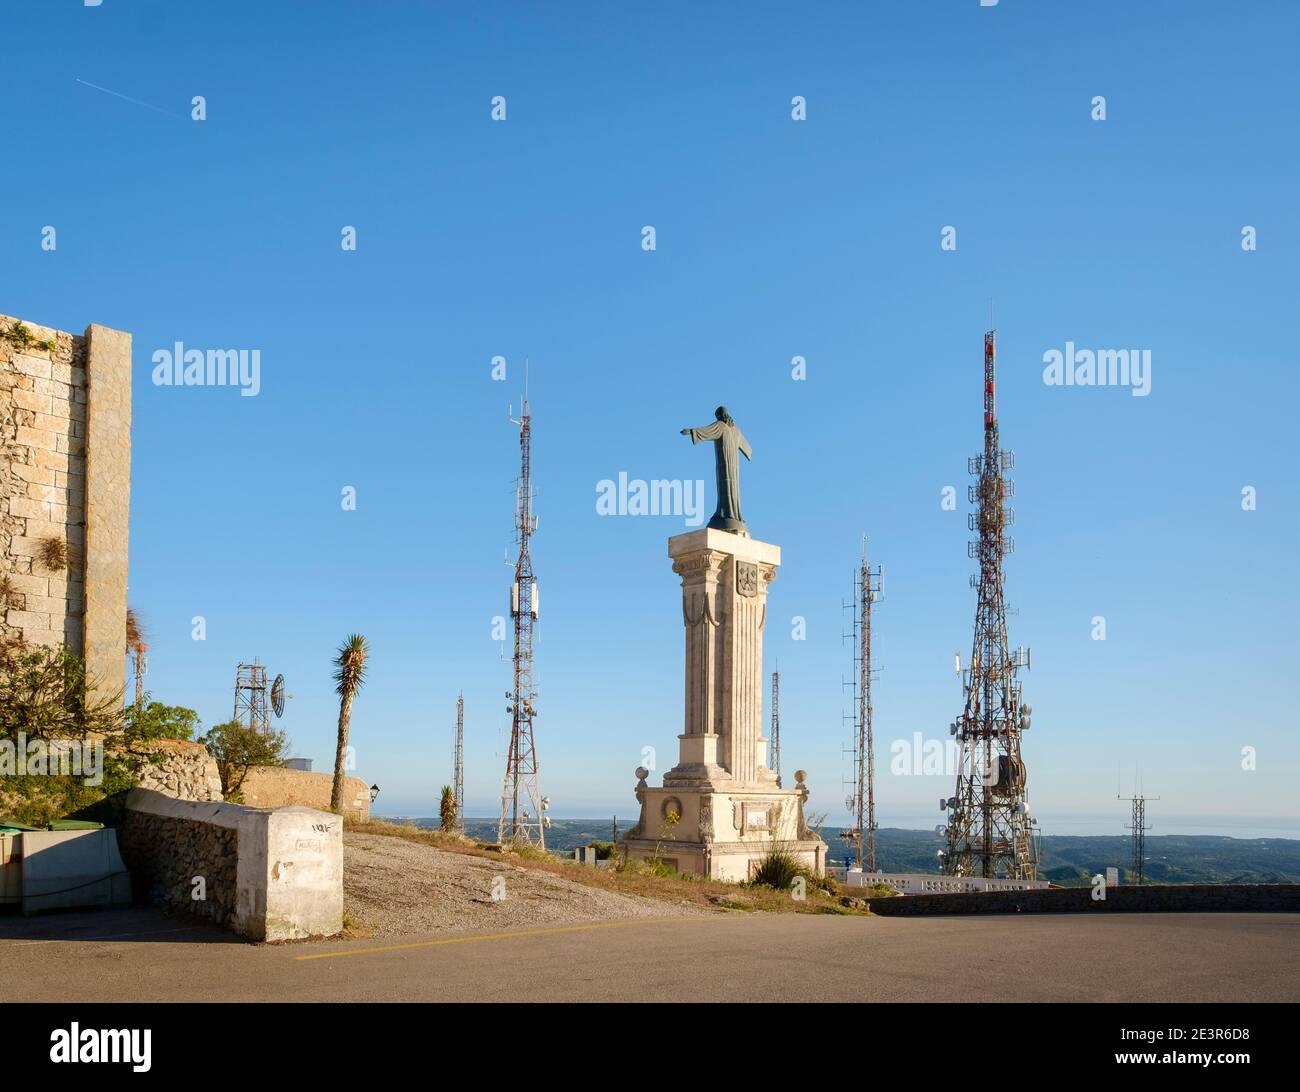 Jesus Christ statue surrounded by unsightly mobile phone transmitter masts on Mount Toro, the highest point on the island of Menorca, Spain Stock Photo